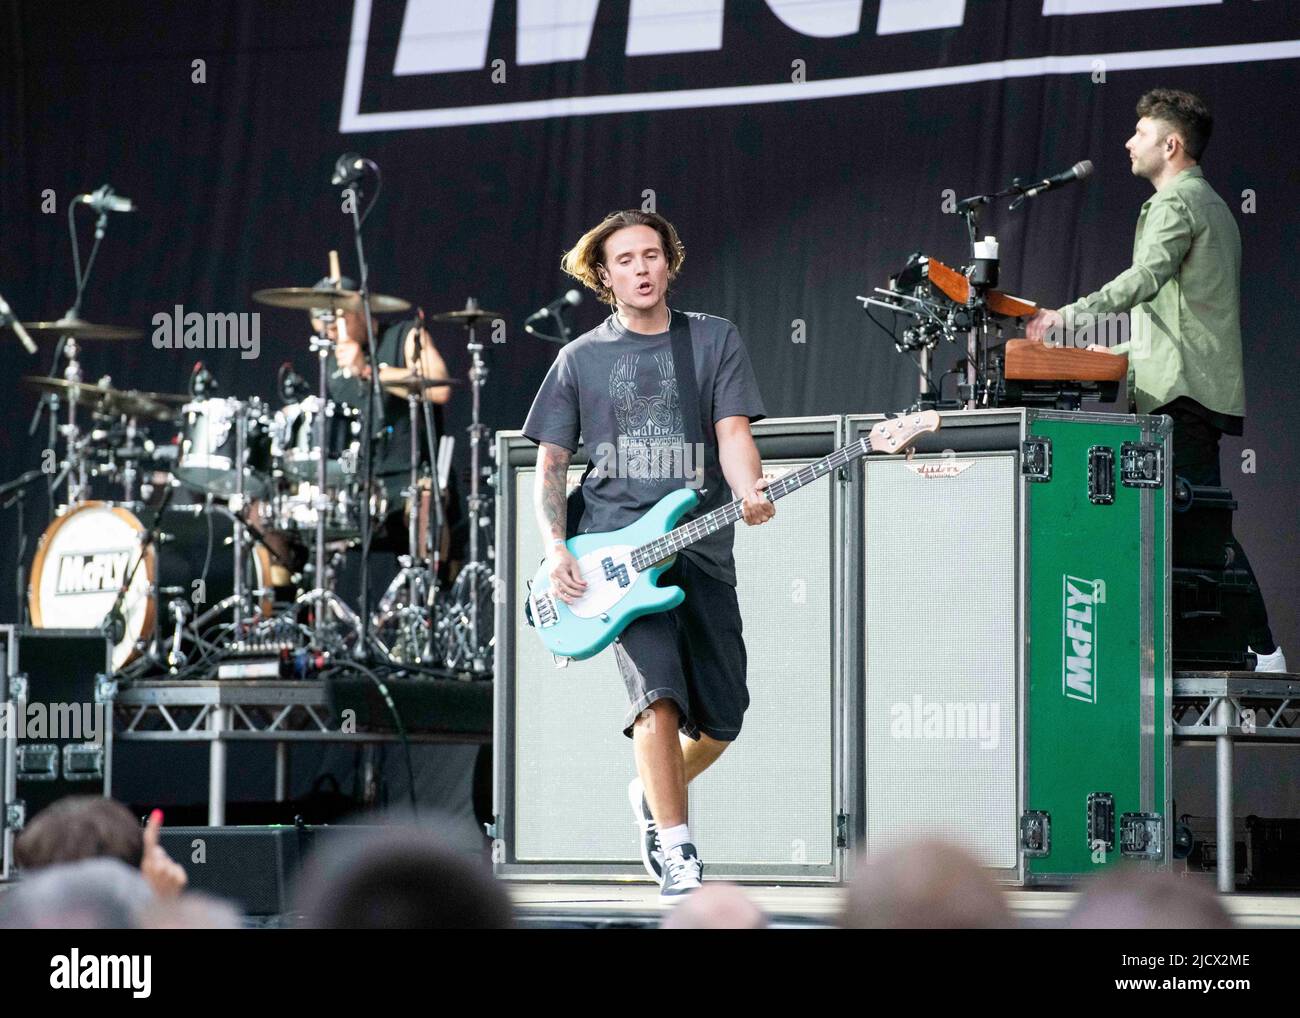 London, UK, Wednesday, 15th June 2022 Dougie Poynter of McFly performs live on stage as part of the Hampton Court Palace Festival, Hampton Court, East Molesey. Credit: DavidJensen / Empics Entertainment / Alamy Live News Stock Photo